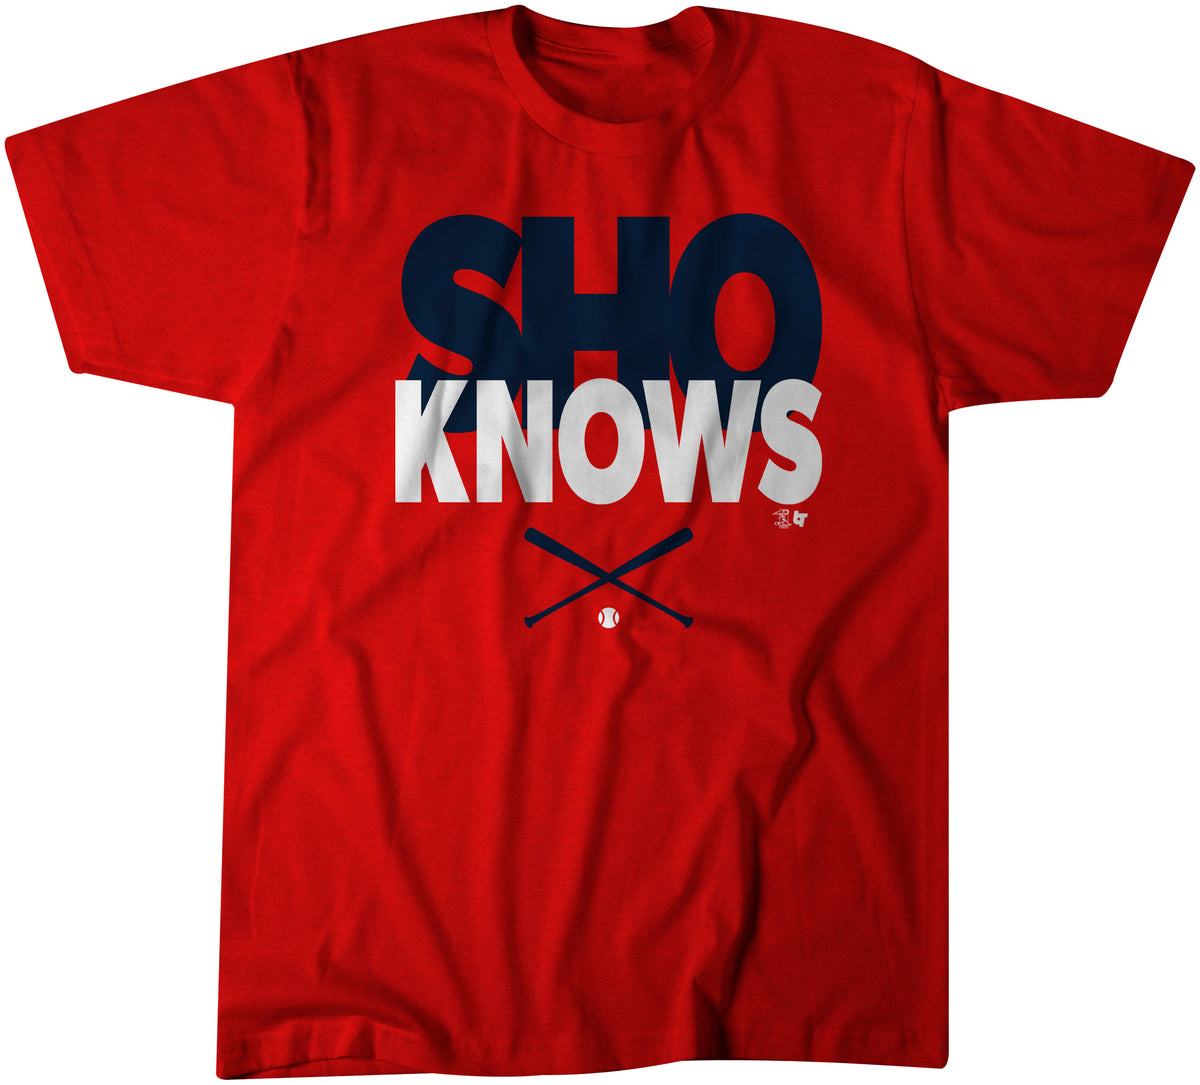 Shohei Ohtani Sho Knows Shirt - Officially MLBPA Licensed - BreakingT